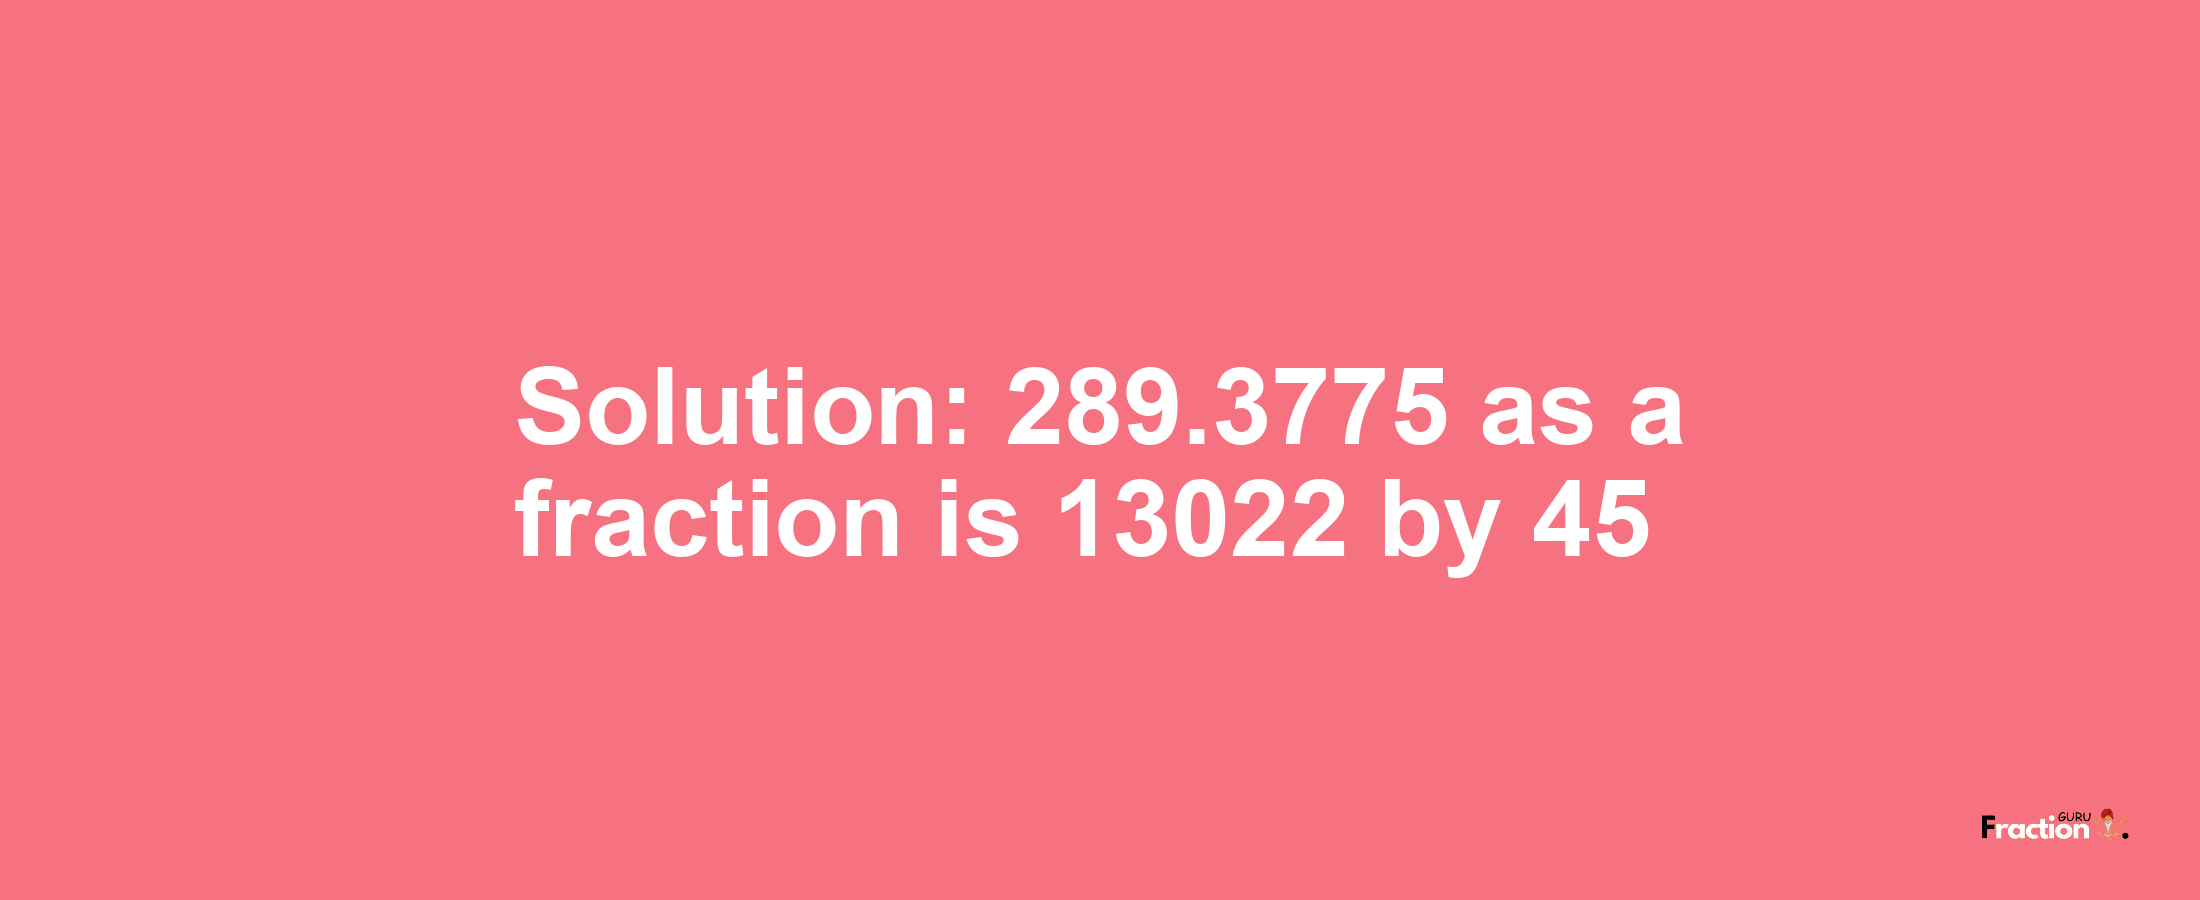 Solution:289.3775 as a fraction is 13022/45